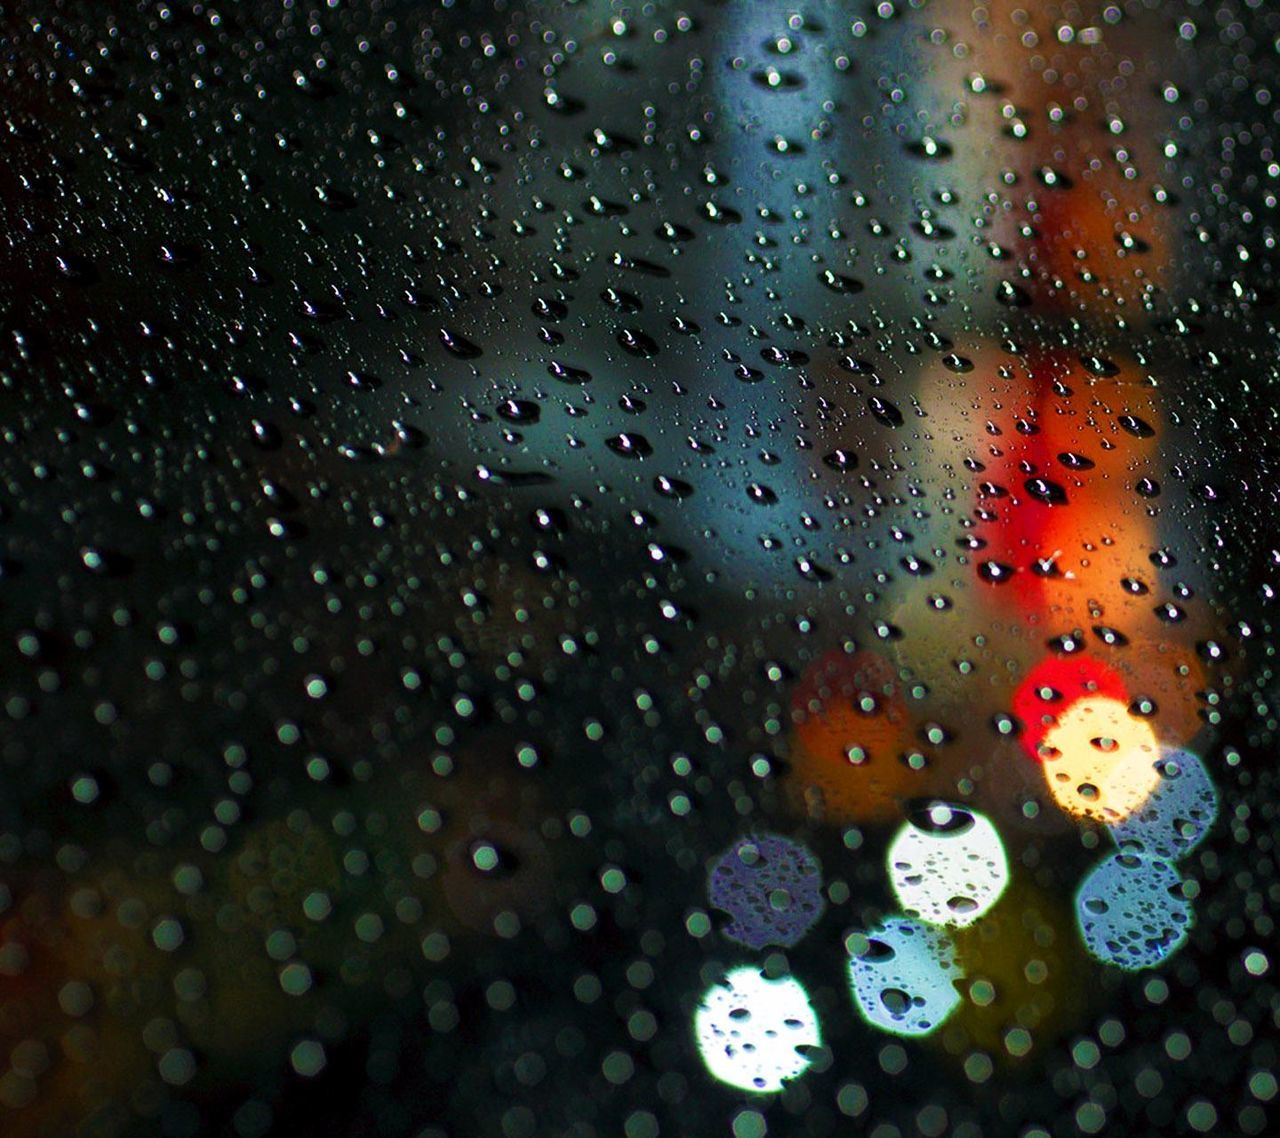 drop, wet, window, rain, transparent, glass - material, indoors, water, full frame, season, backgrounds, raindrop, weather, close-up, glass, droplet, focus on foreground, water drop, car, sky